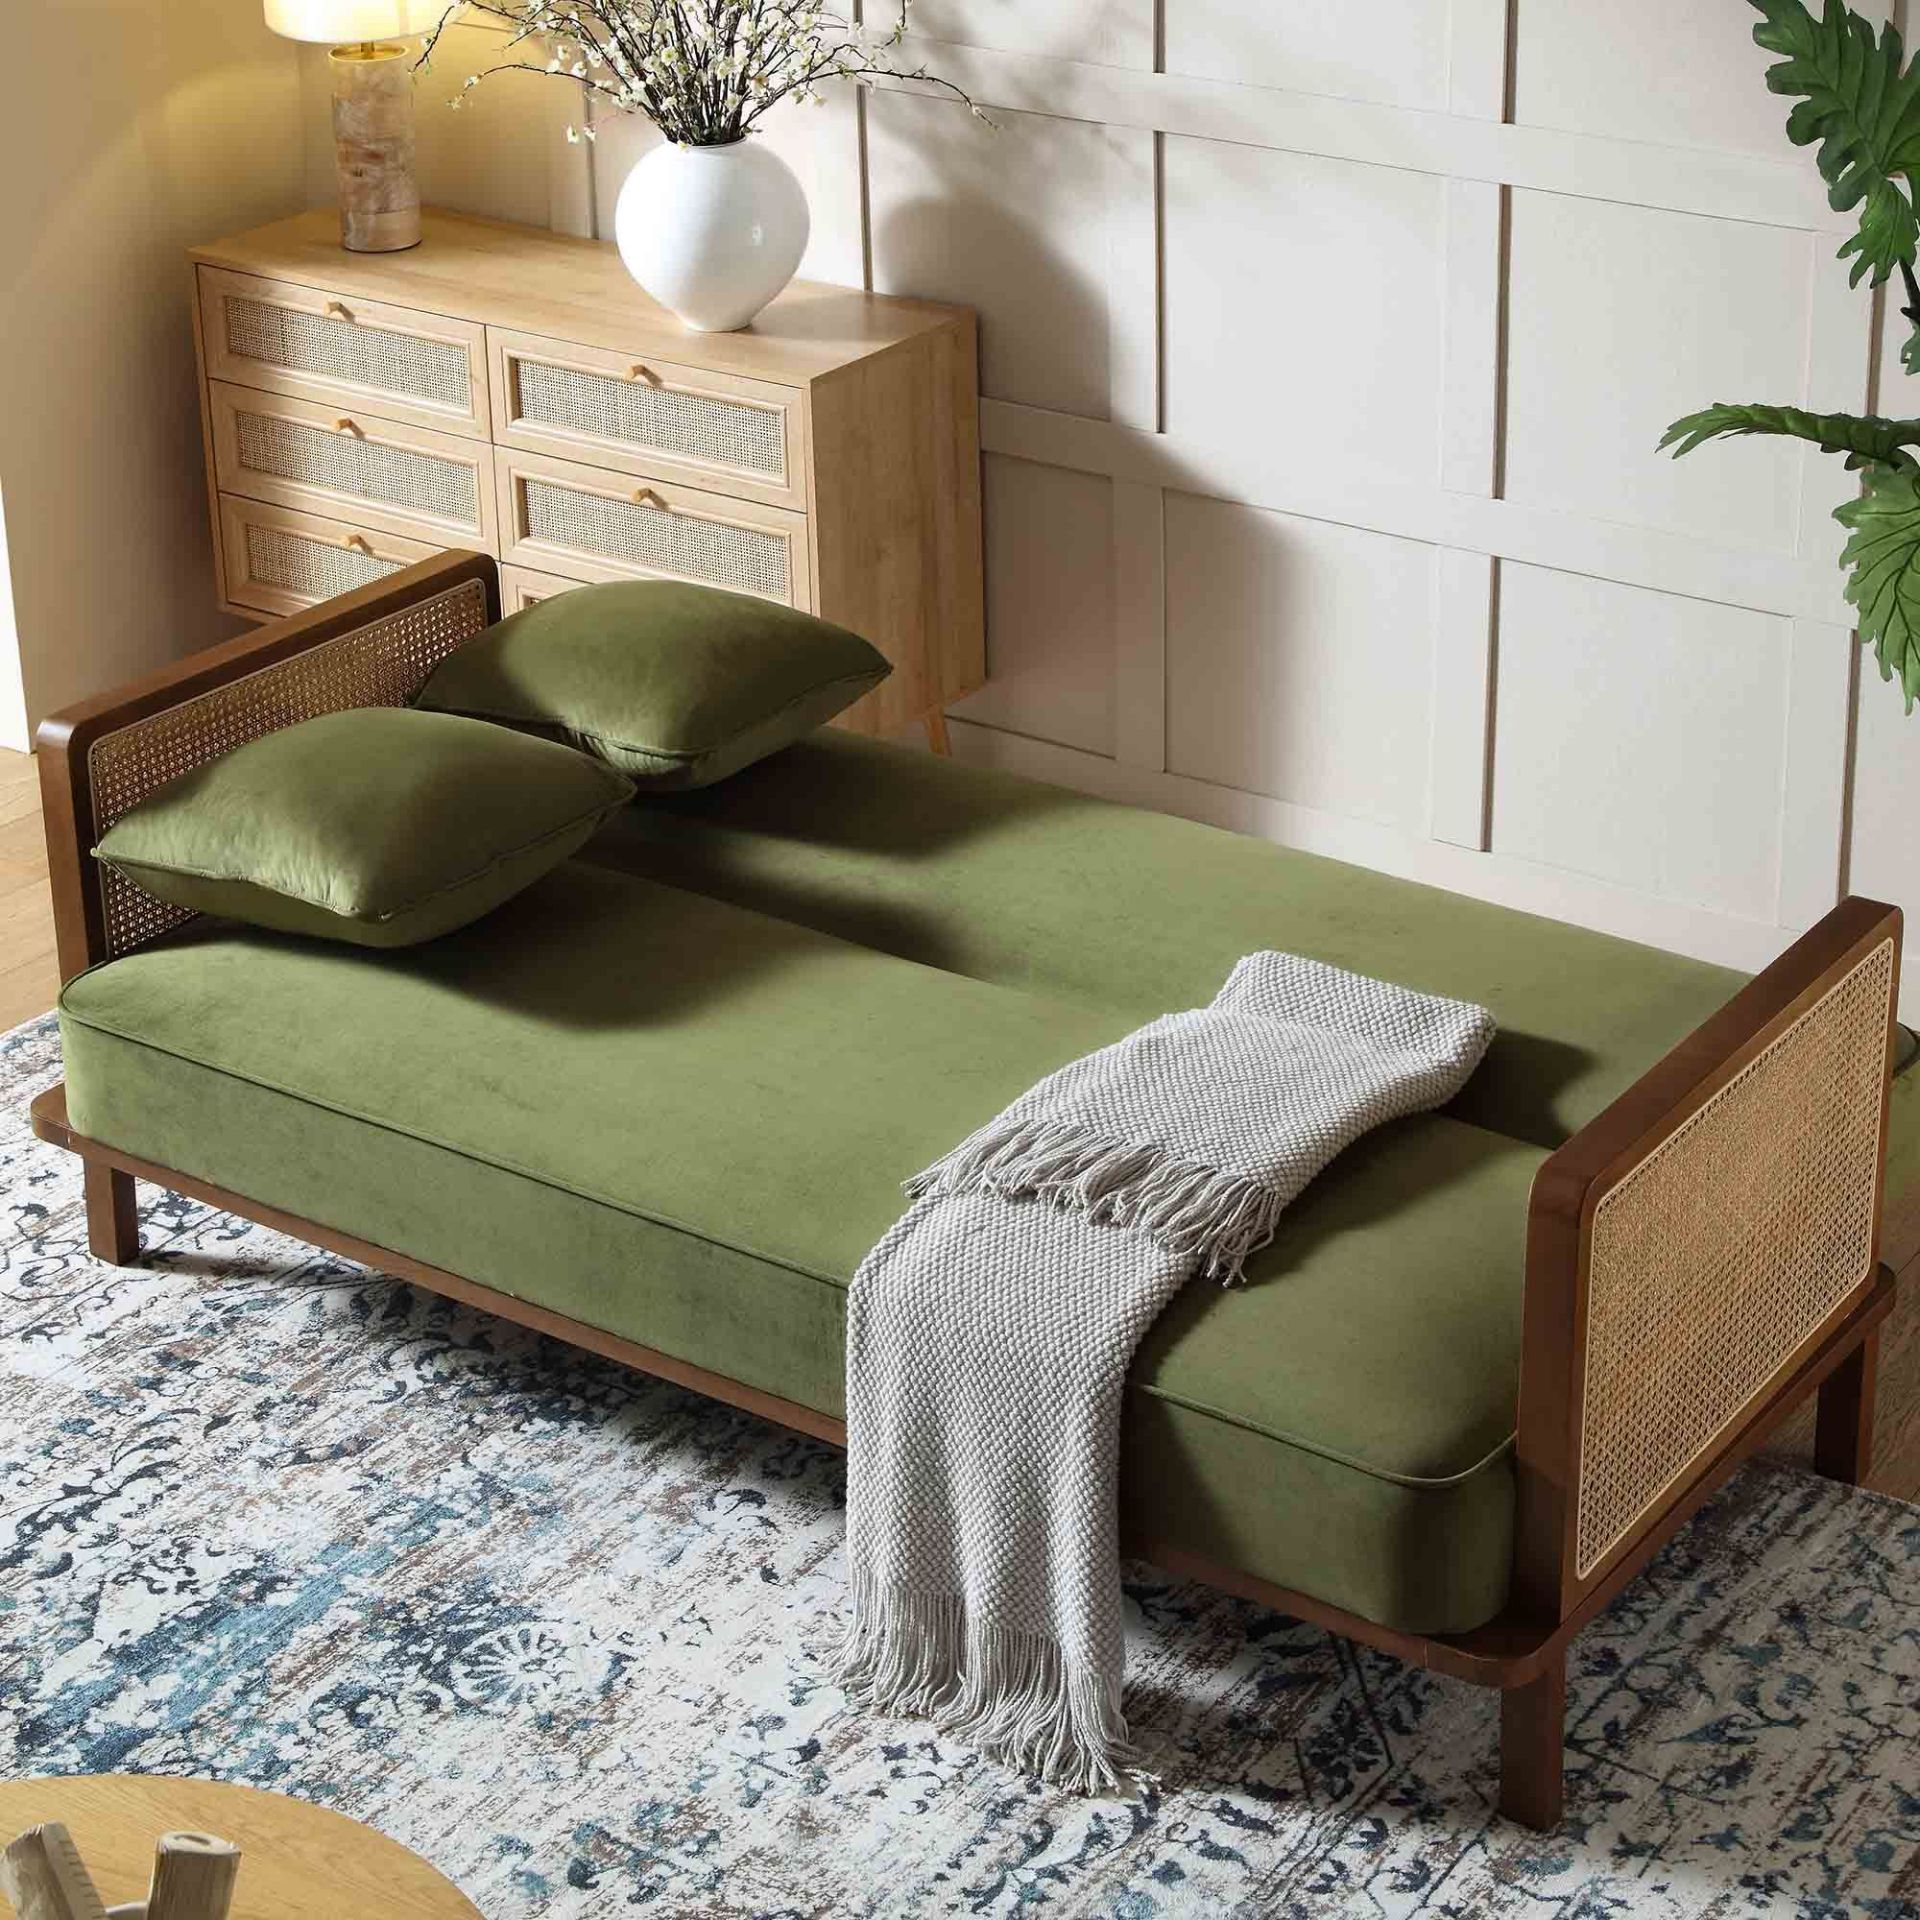 Pienza Cane Sofa Bed, Moss Green Velvet with Walnut Frame. -ER23. RRP £649.99. Upholstered in - Image 2 of 2